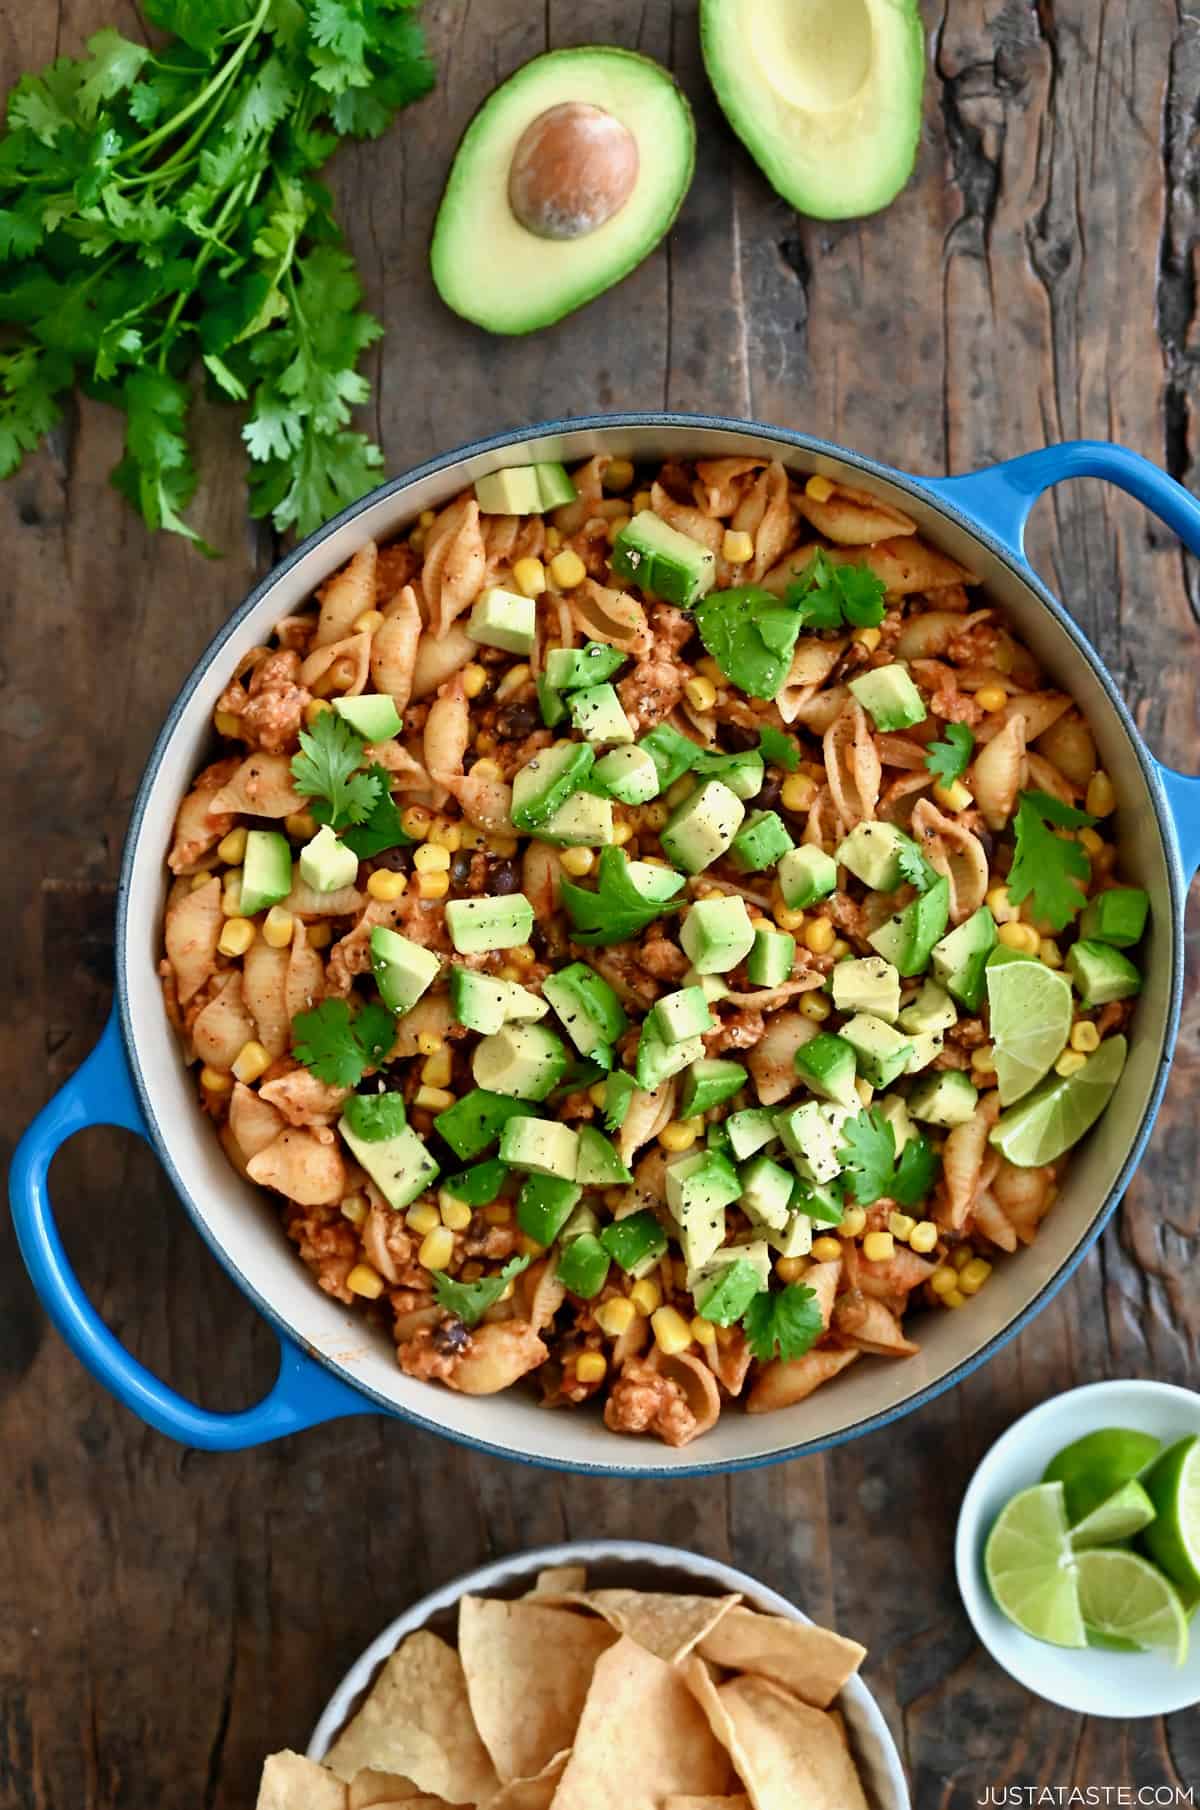 A dutch oven containing cheesy turkey taco pasta topped with diced avocado and chopped fresh cilantro next to a small plate with slices of limes.